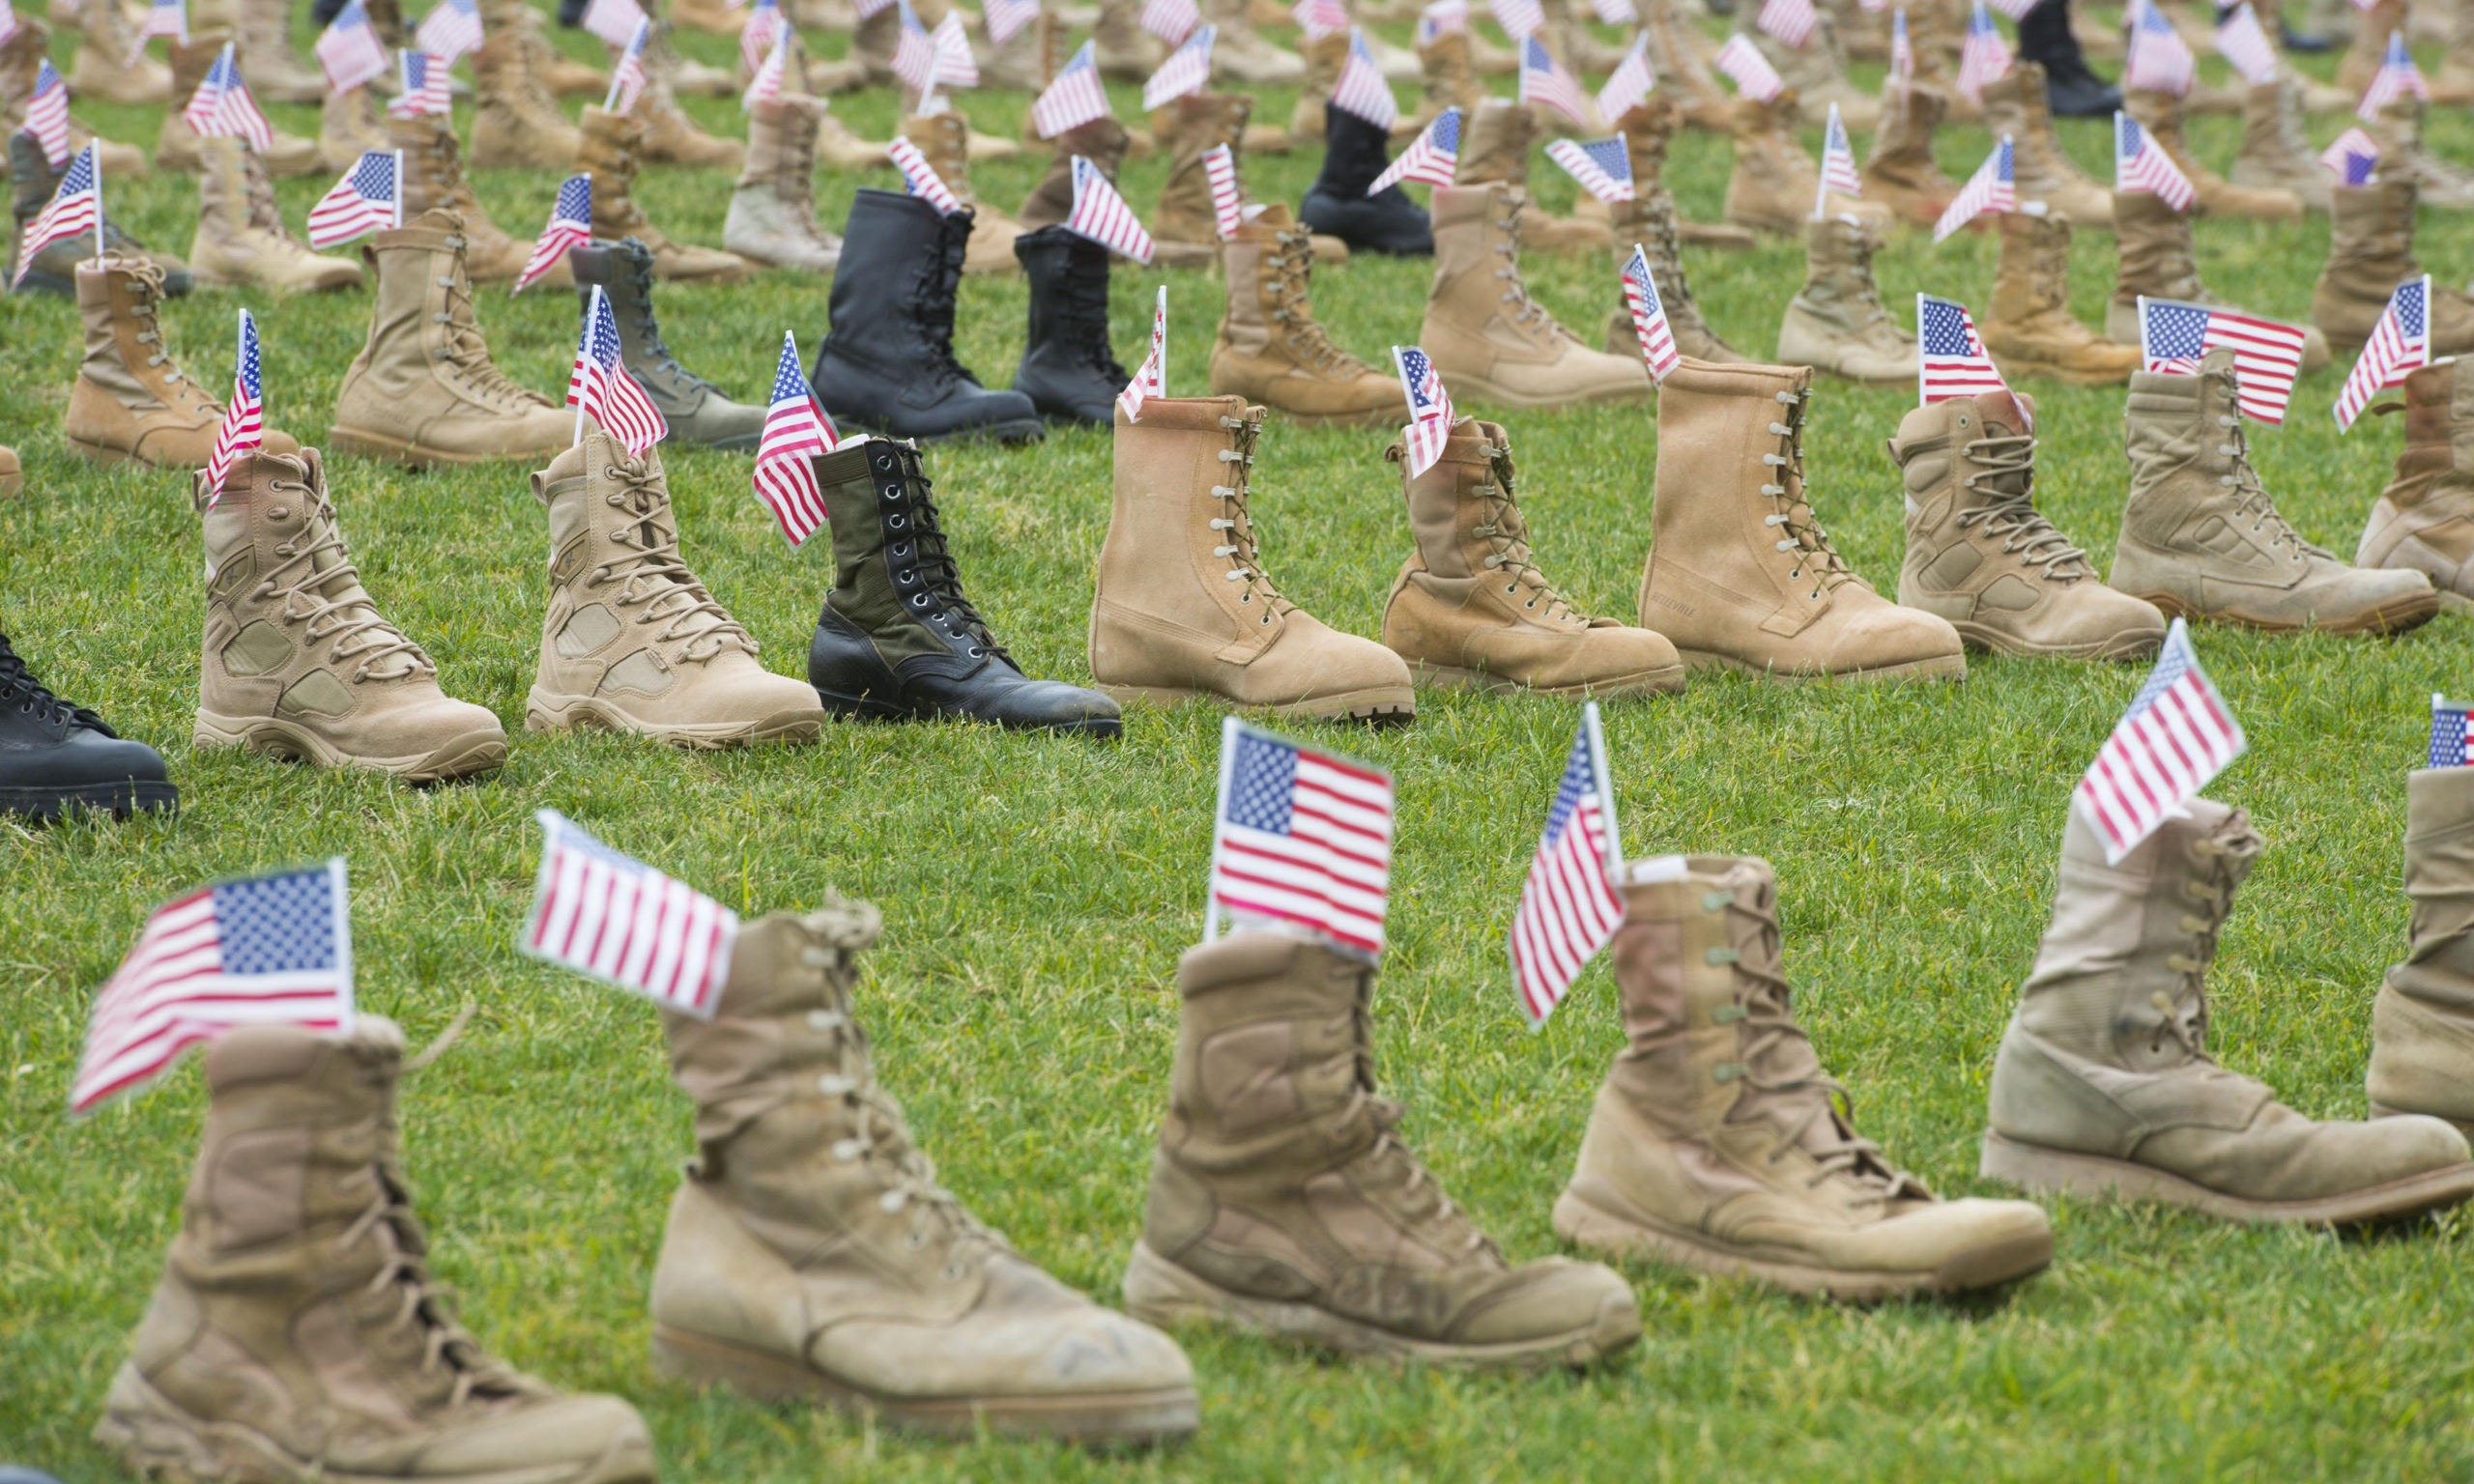 Fort Bragg in search of 7,000 combat boots for display honoring fallen service members